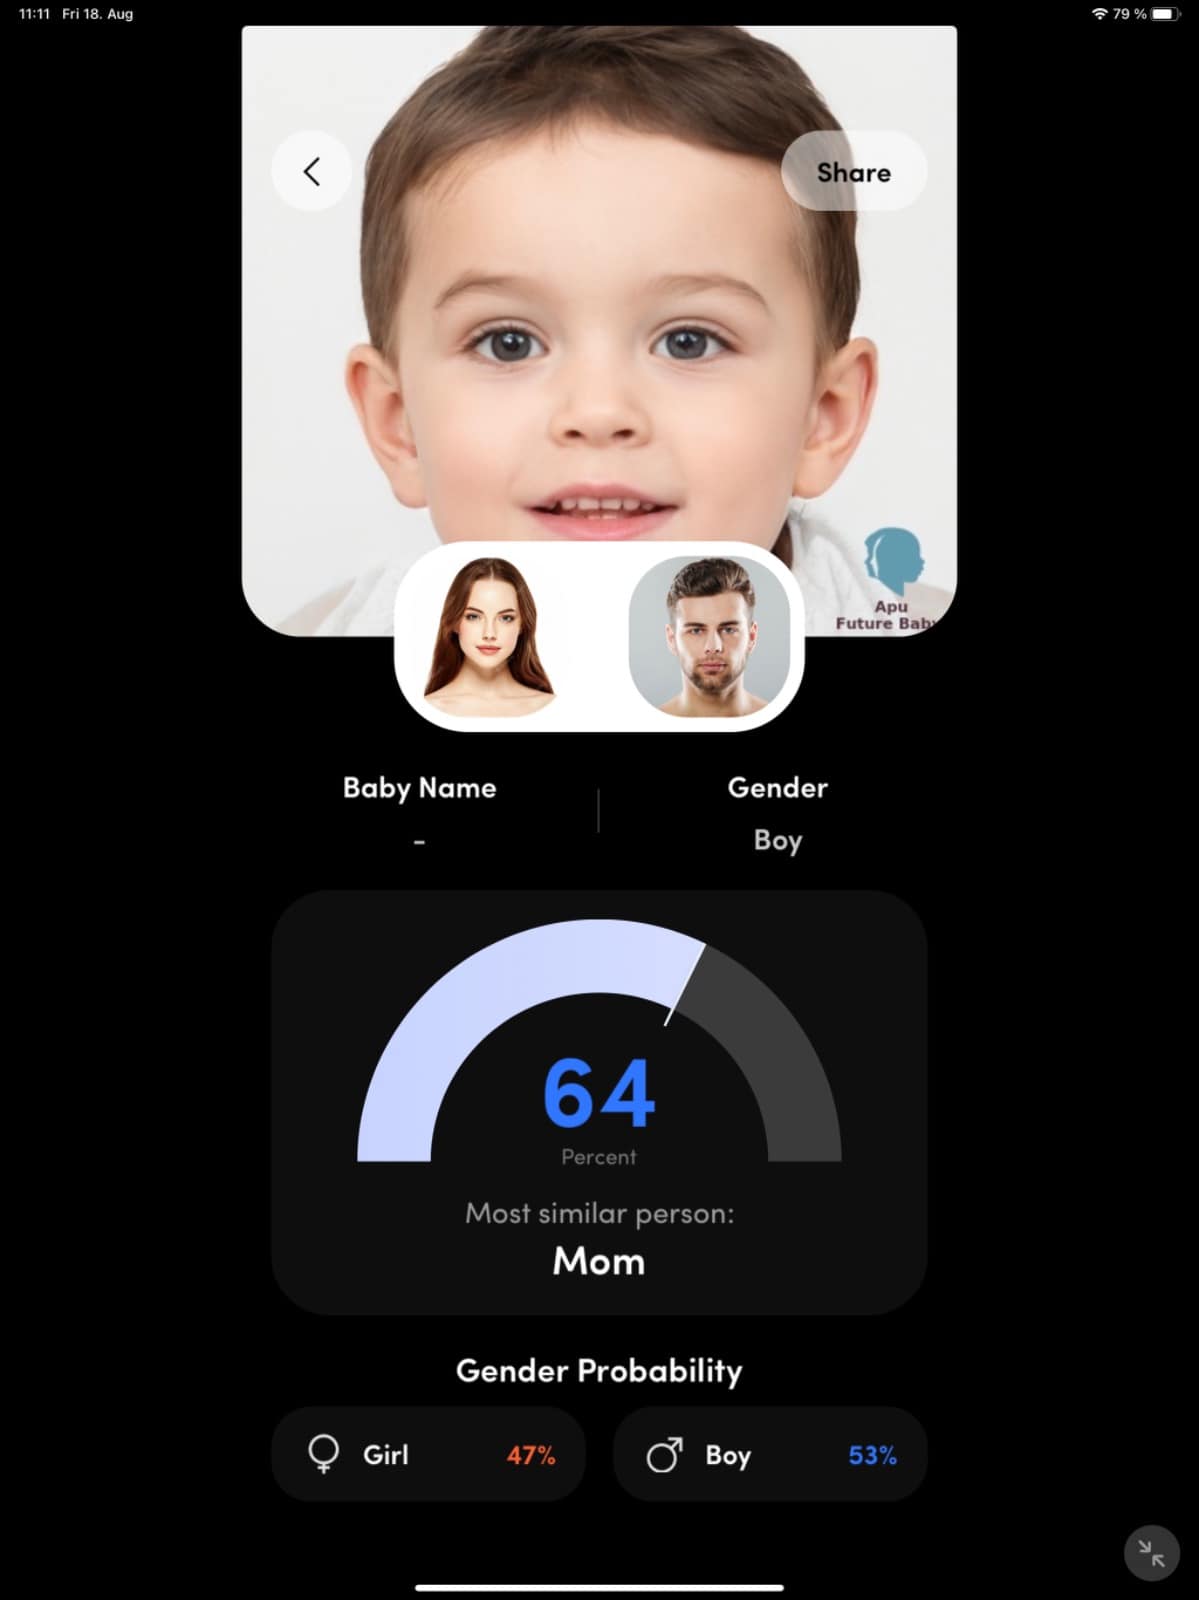 Future baby face maker - Apps on Google Play